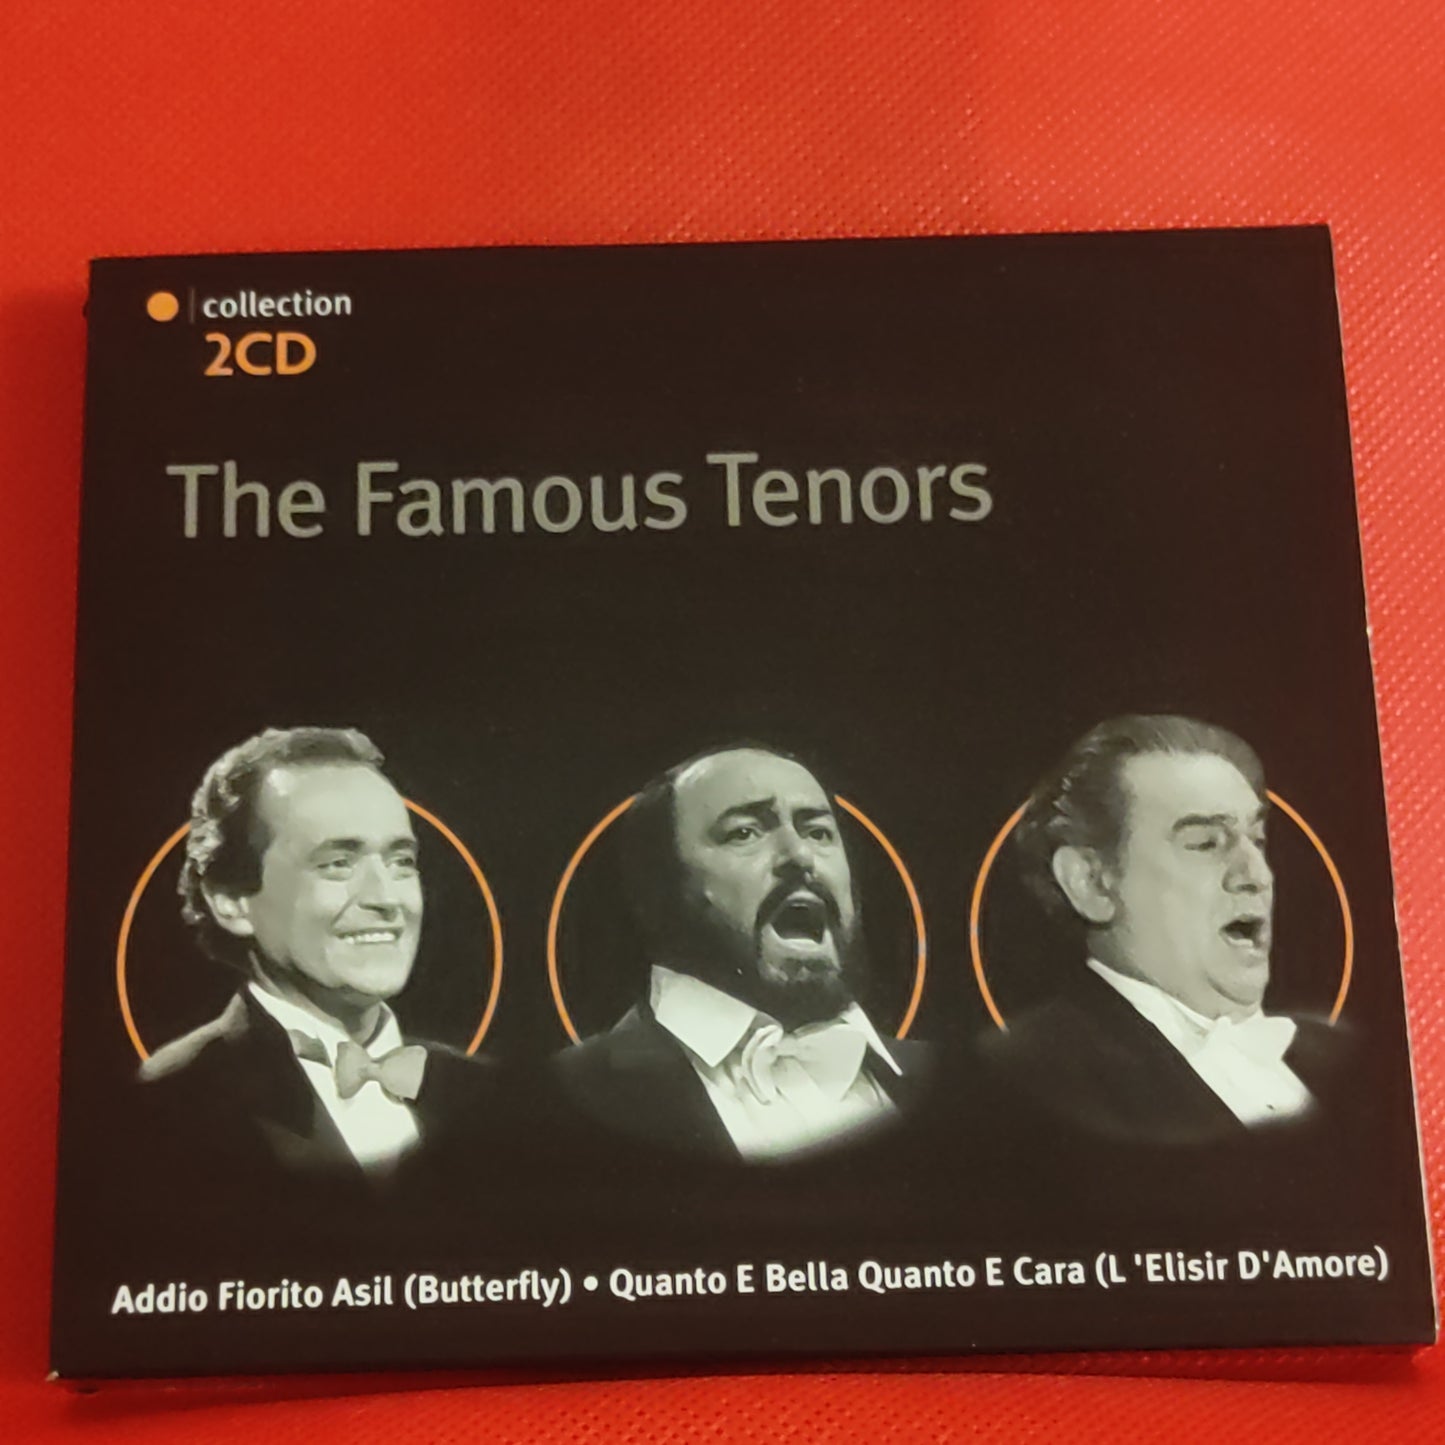 The Famouse Tenors